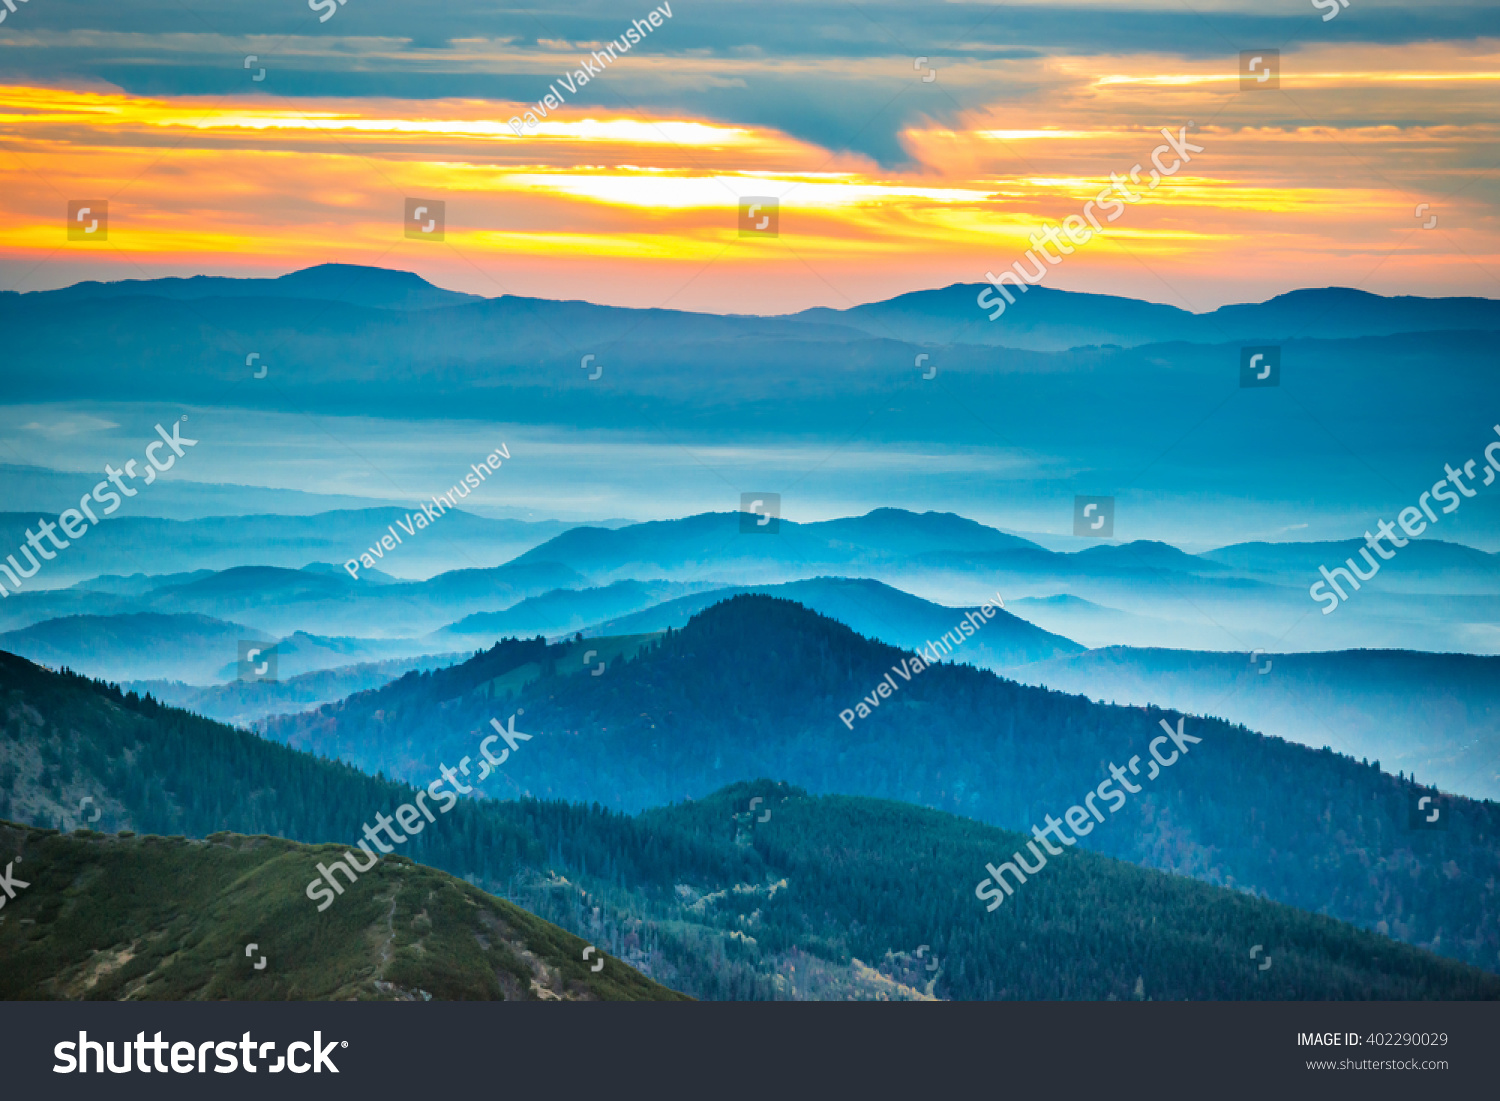 Sunset in the mountains. Dramatic colorful clouds over blue hills #402290029